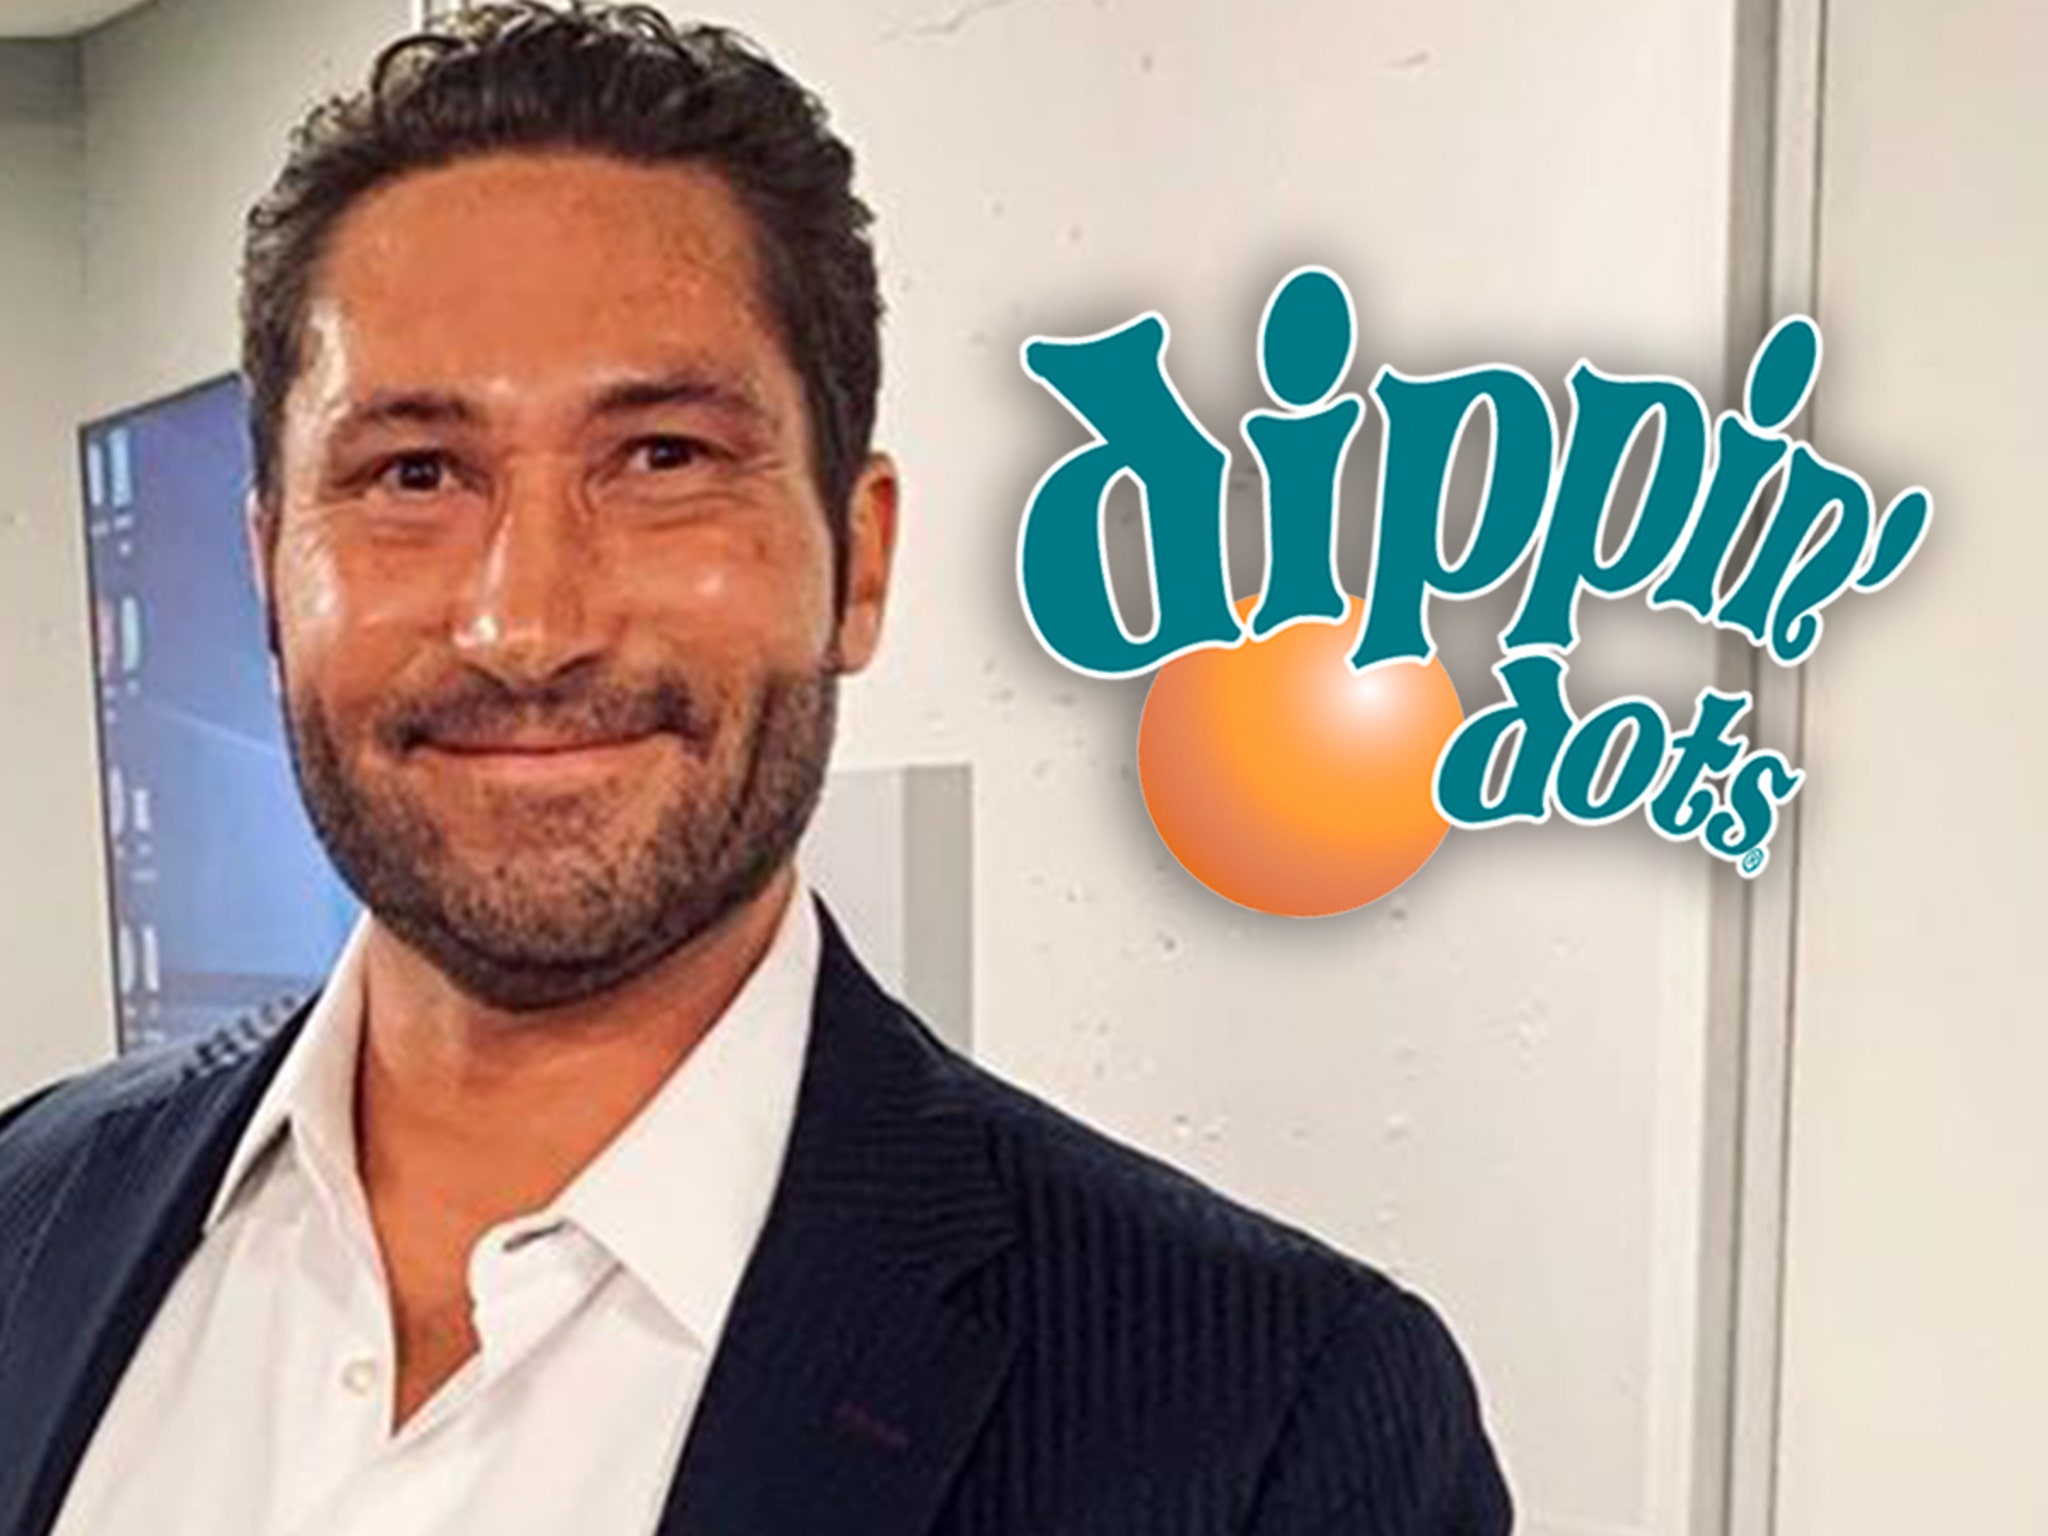 Dippin Dots CEO Sued by Ex-Girlfriend Over Alleged Revenge Porn pic